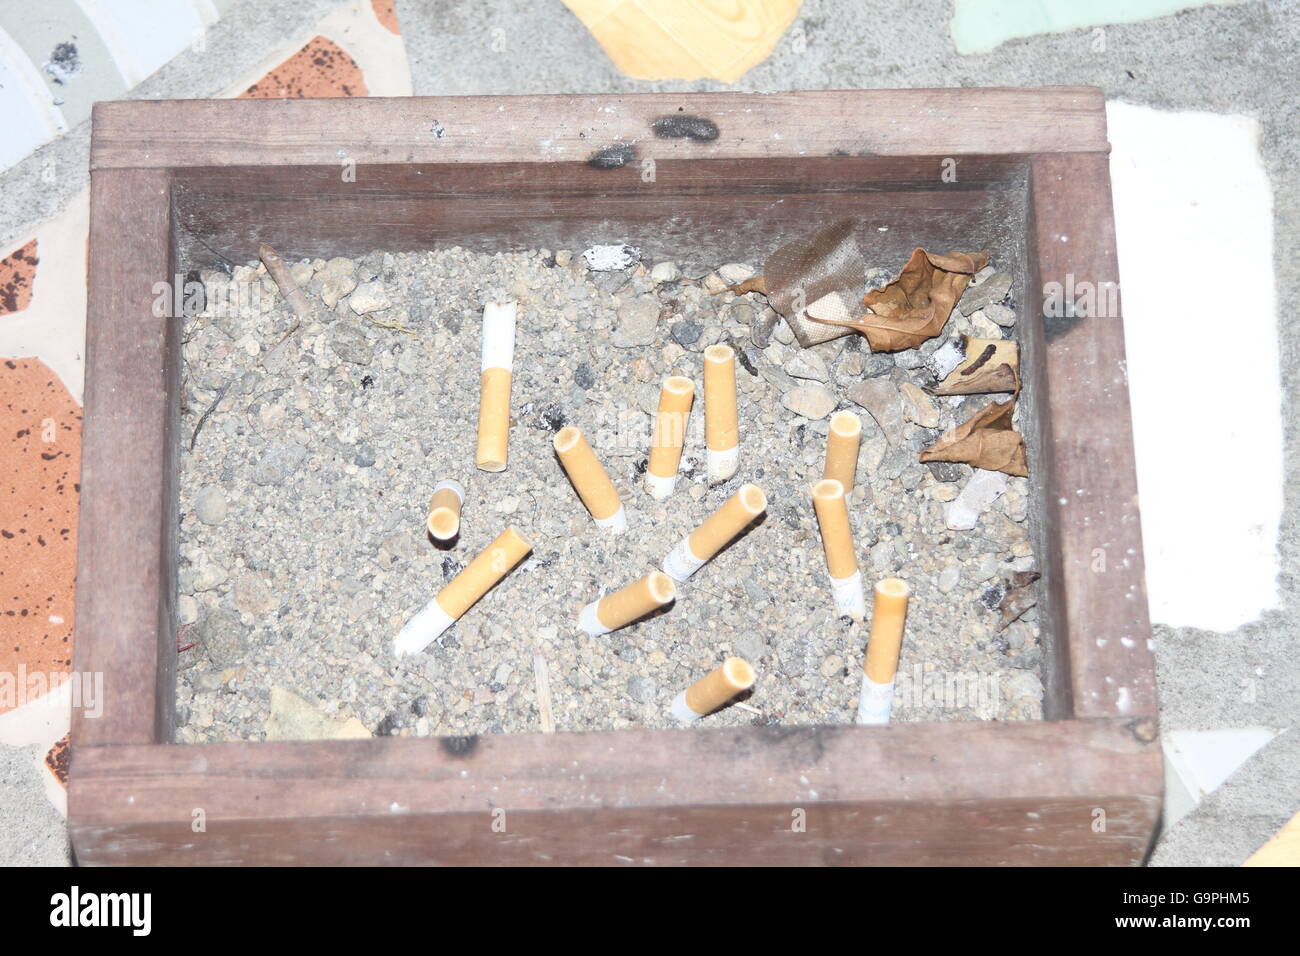 Cigarette butts in a big ashtray full of sand Stock Photo